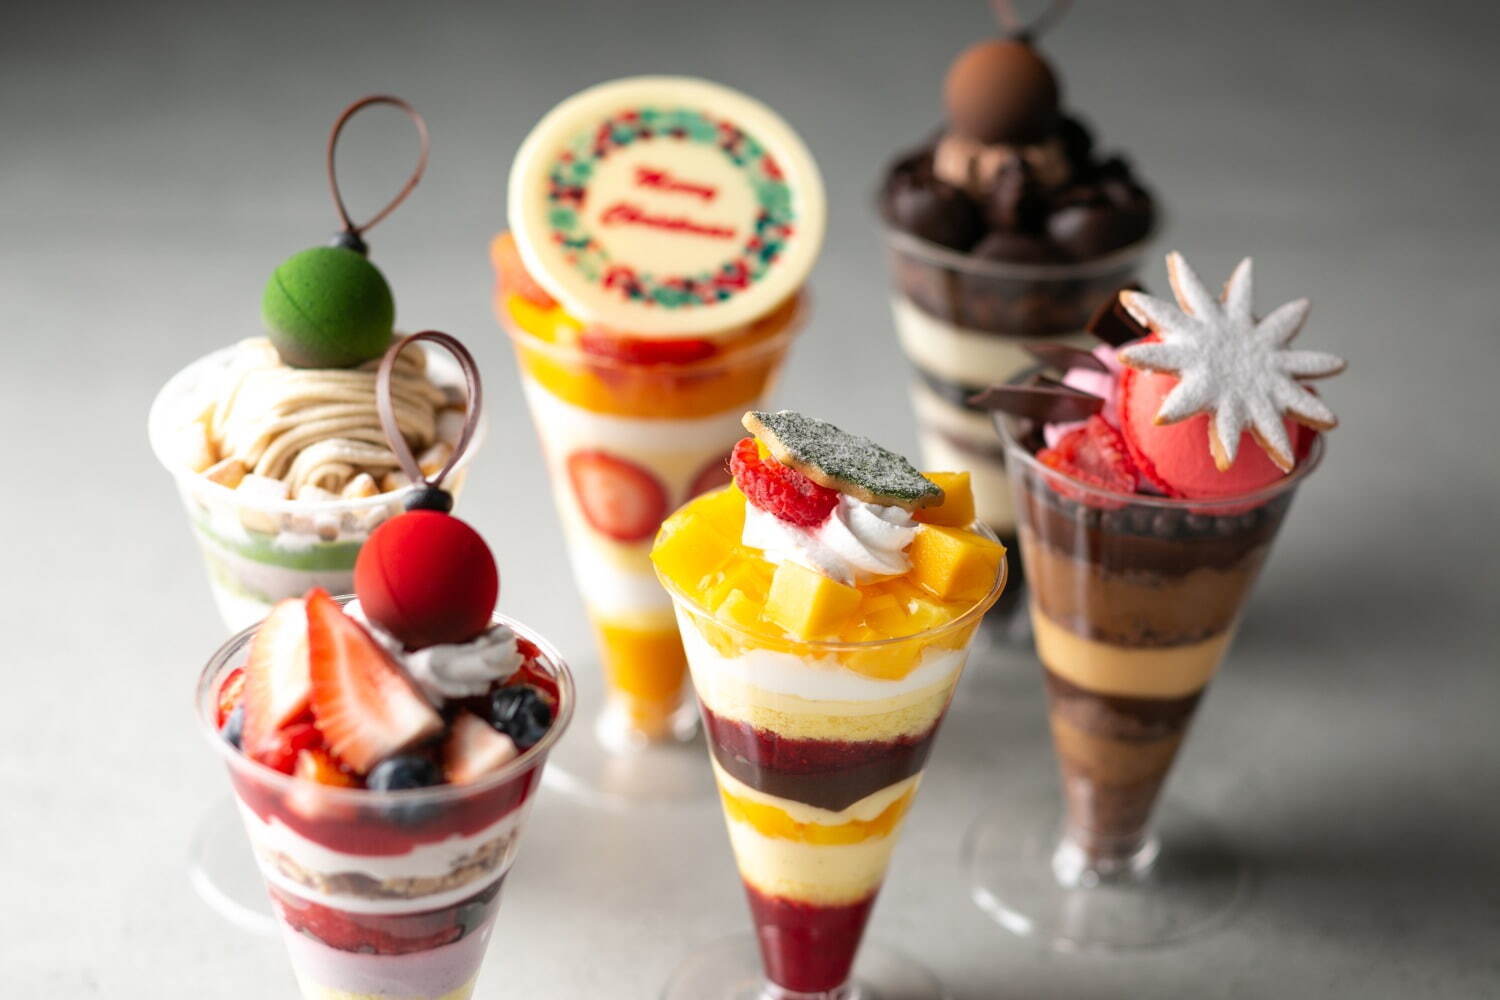 COLORFUL PARFAIT SELECTION -世界を旅するクリスマスパフェ 2nd- (6個セット) 6,000円